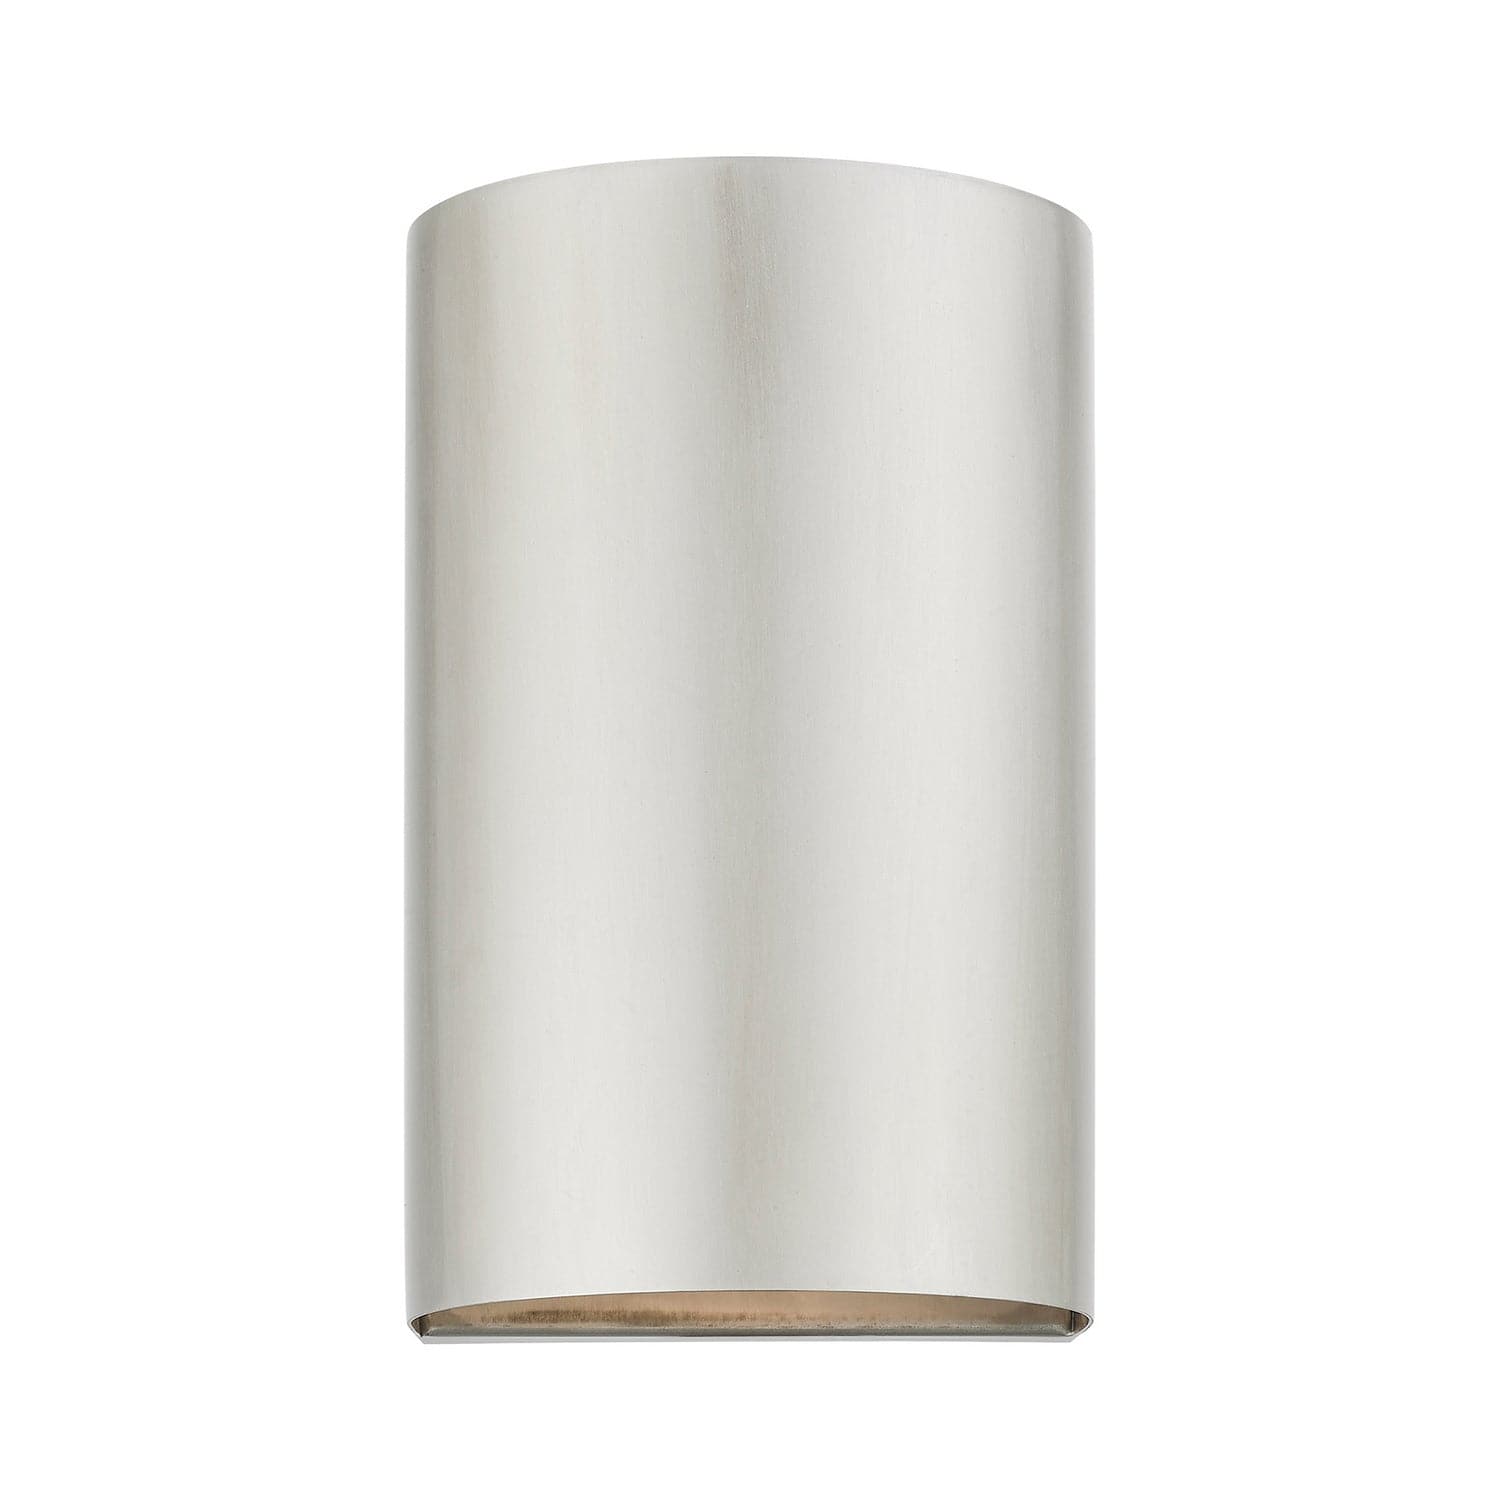 Livex Lighting - 22061-91 - One Light Outdoor Wall Sconce - Bond - Brushed Nickel